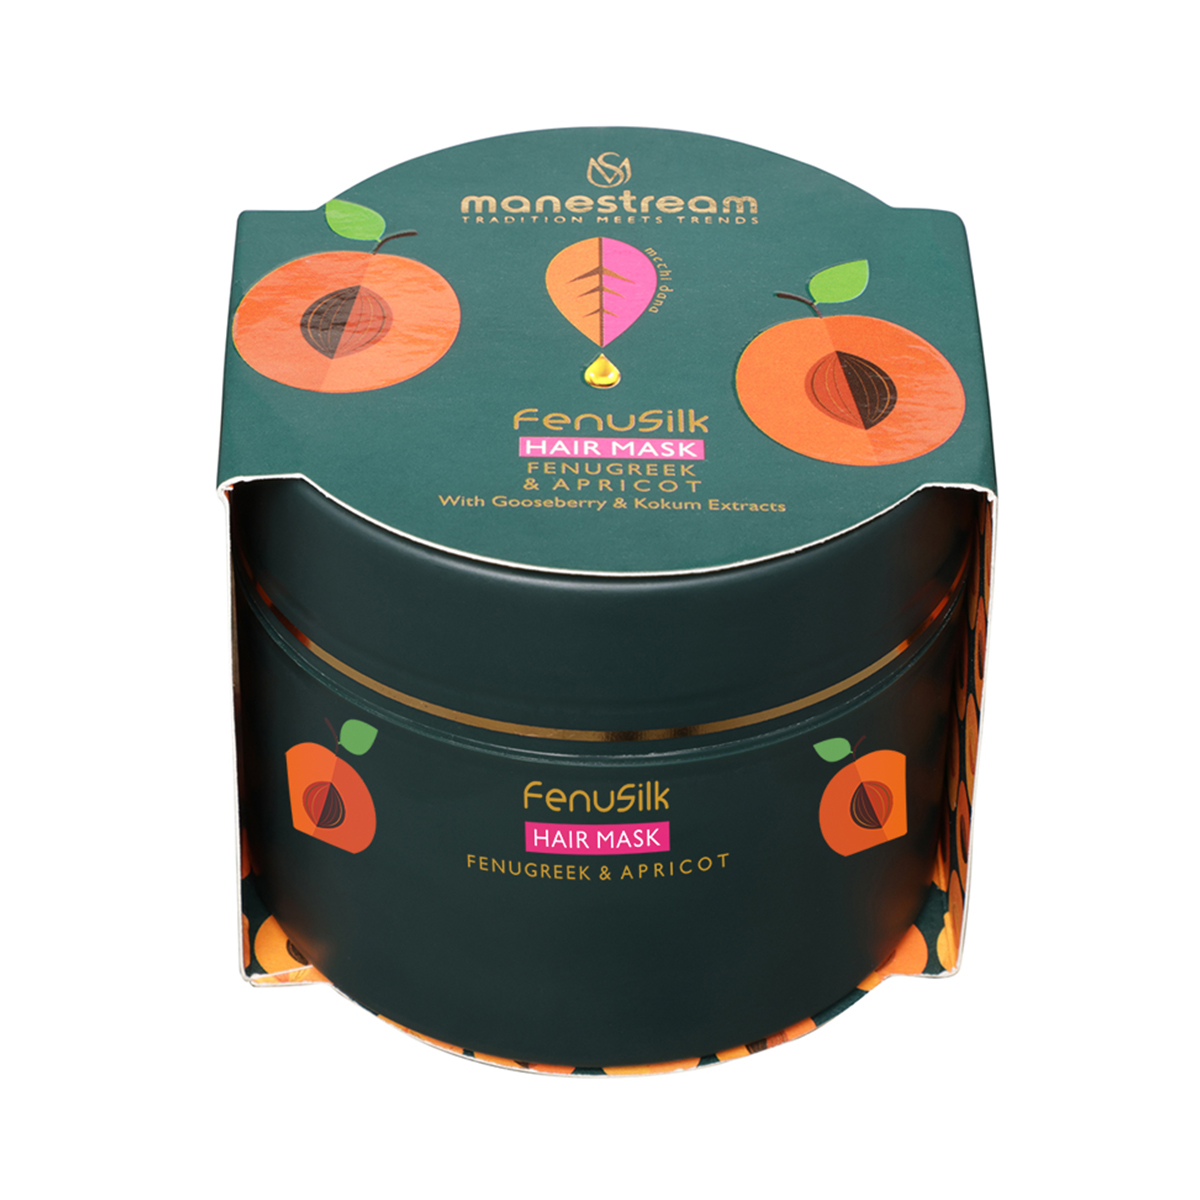 Manestream Fenusilk Hair Mask with Fenugreek & Apricot with Gooseberry & Kokum Extracts, 230gm